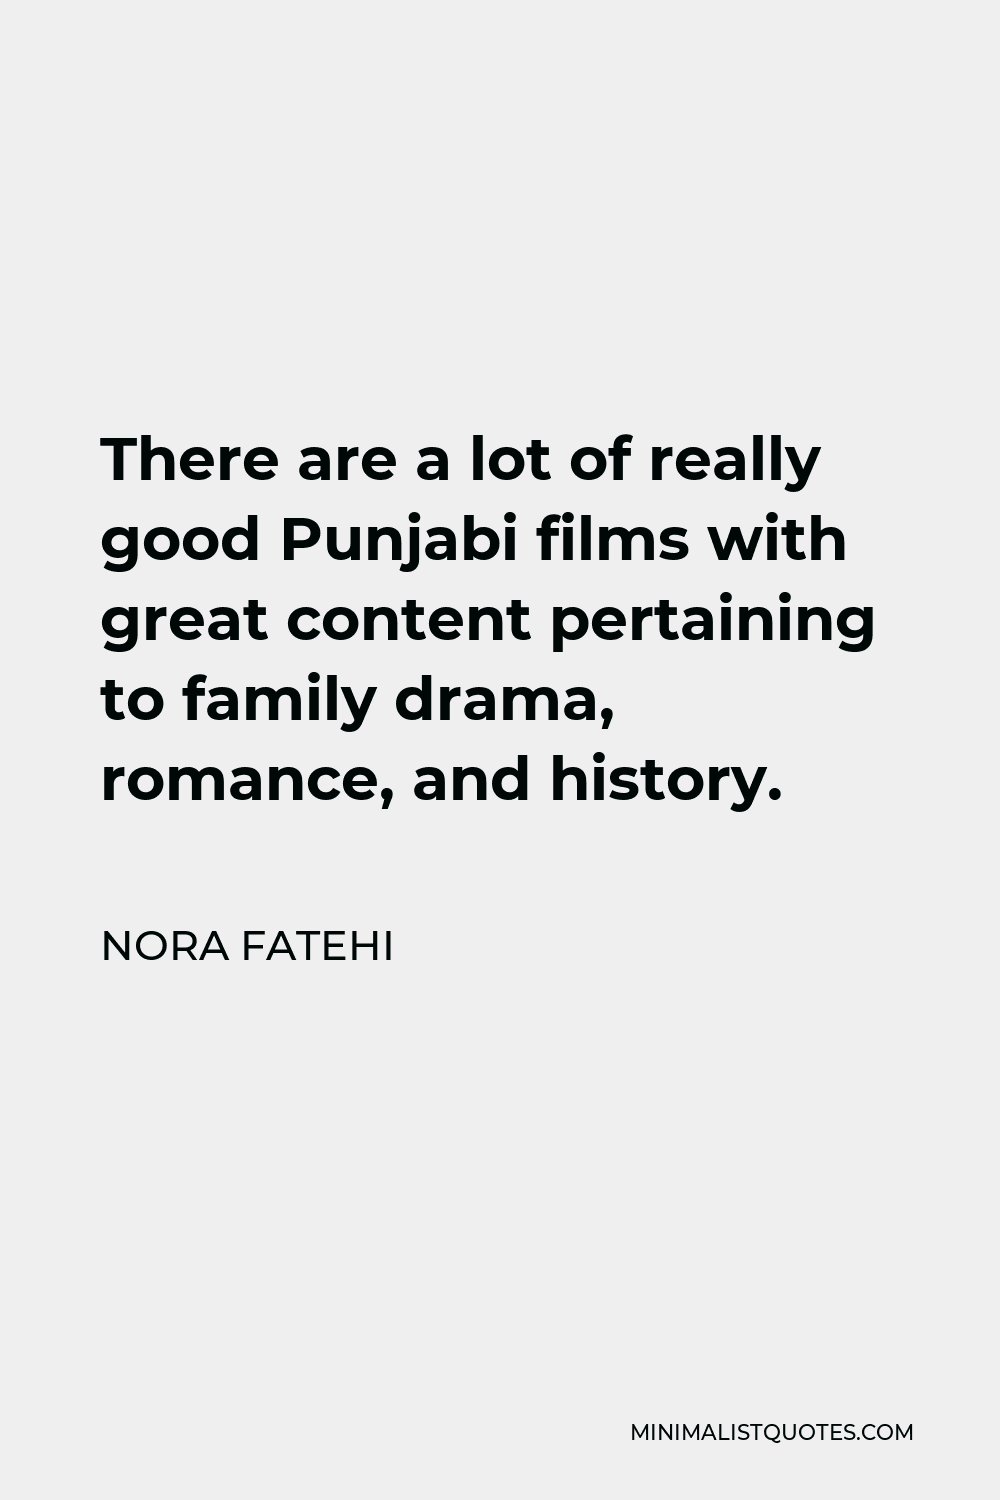 Nora Fatehi Quote - There are a lot of really good Punjabi films with great content pertaining to family drama, romance, and history.